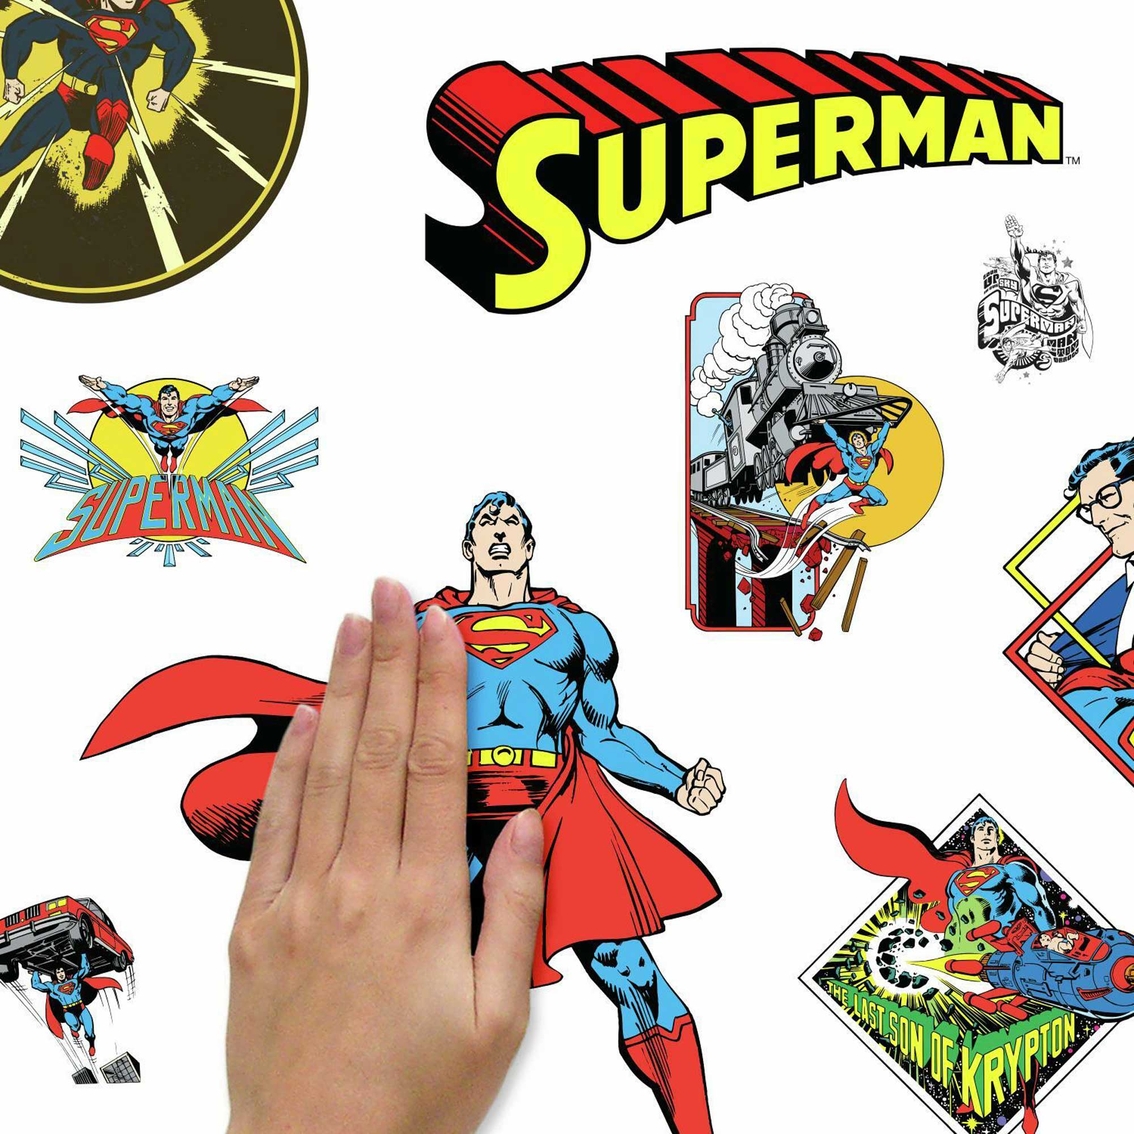 RoomMates Classic Superman Characters Peel and Stick Wall Decals - Image 4 of 5